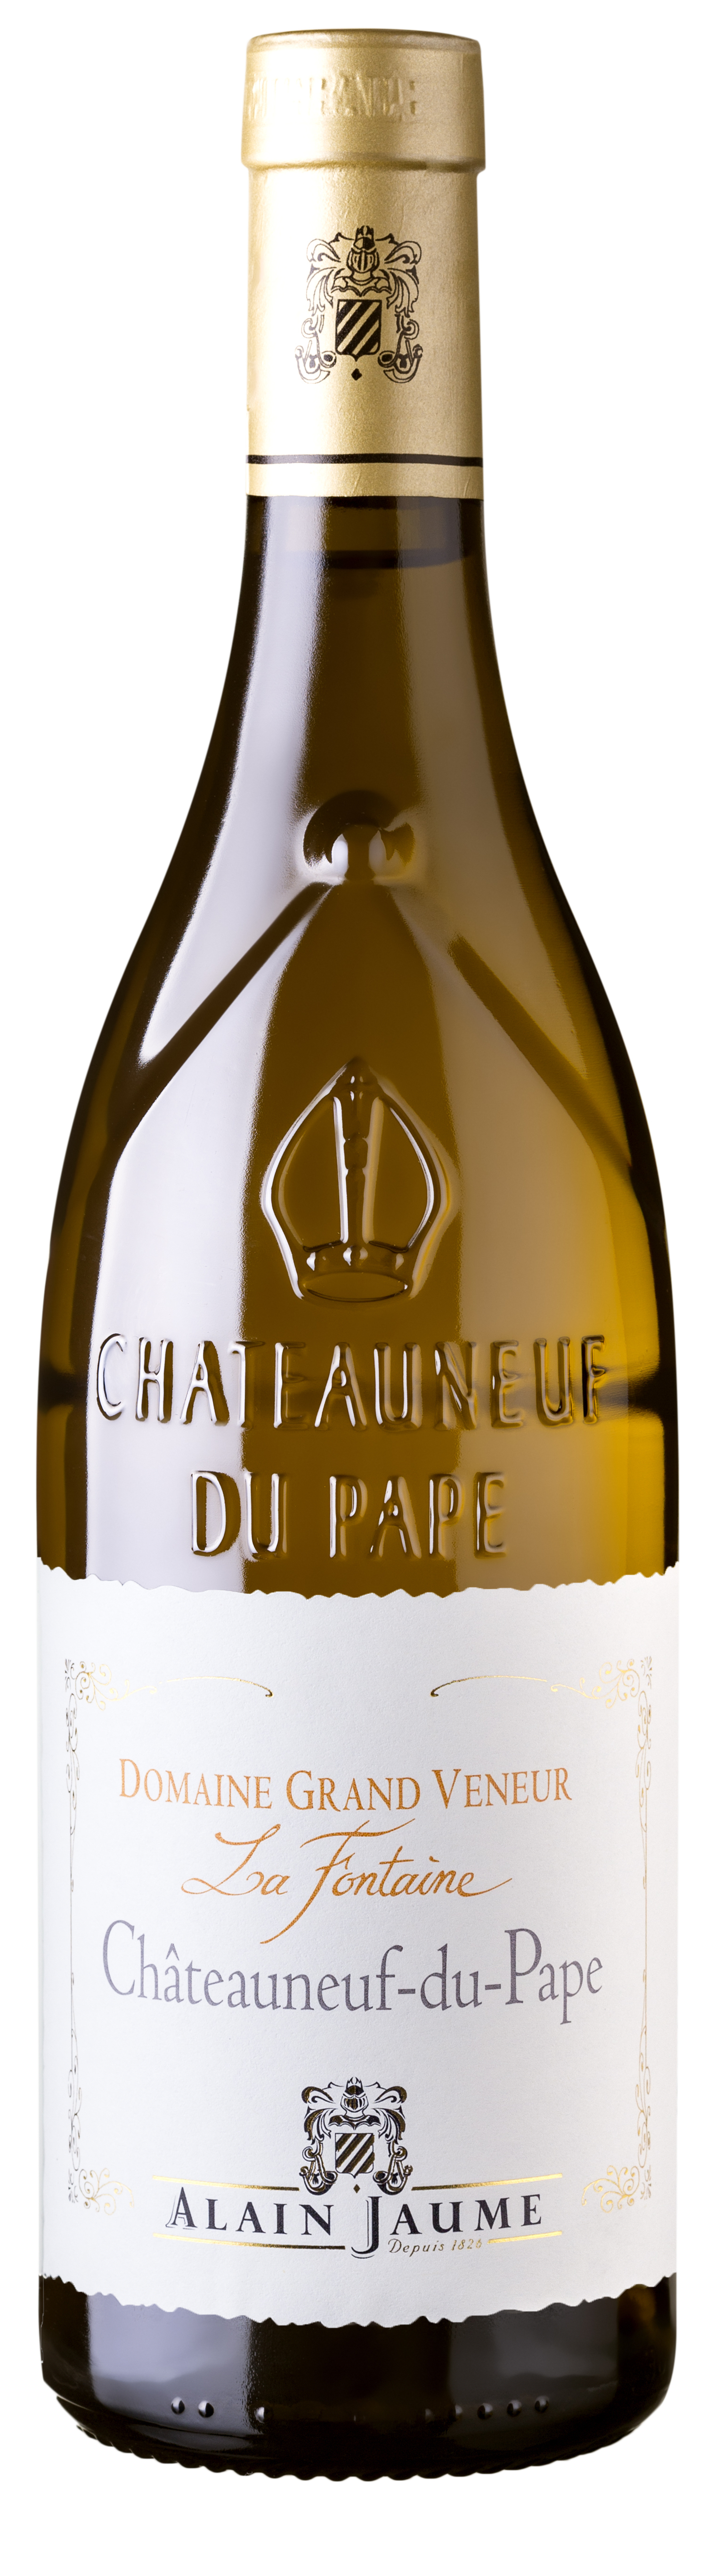 Pape Spanish - - United - Chardonnay Blanc Online Savignon Du Wines California Wines Chateauneuf Order Timeless - States Grand the - Wines | - Wines Port Veneur 2021 La from Cabernet Wine French Fontaine -